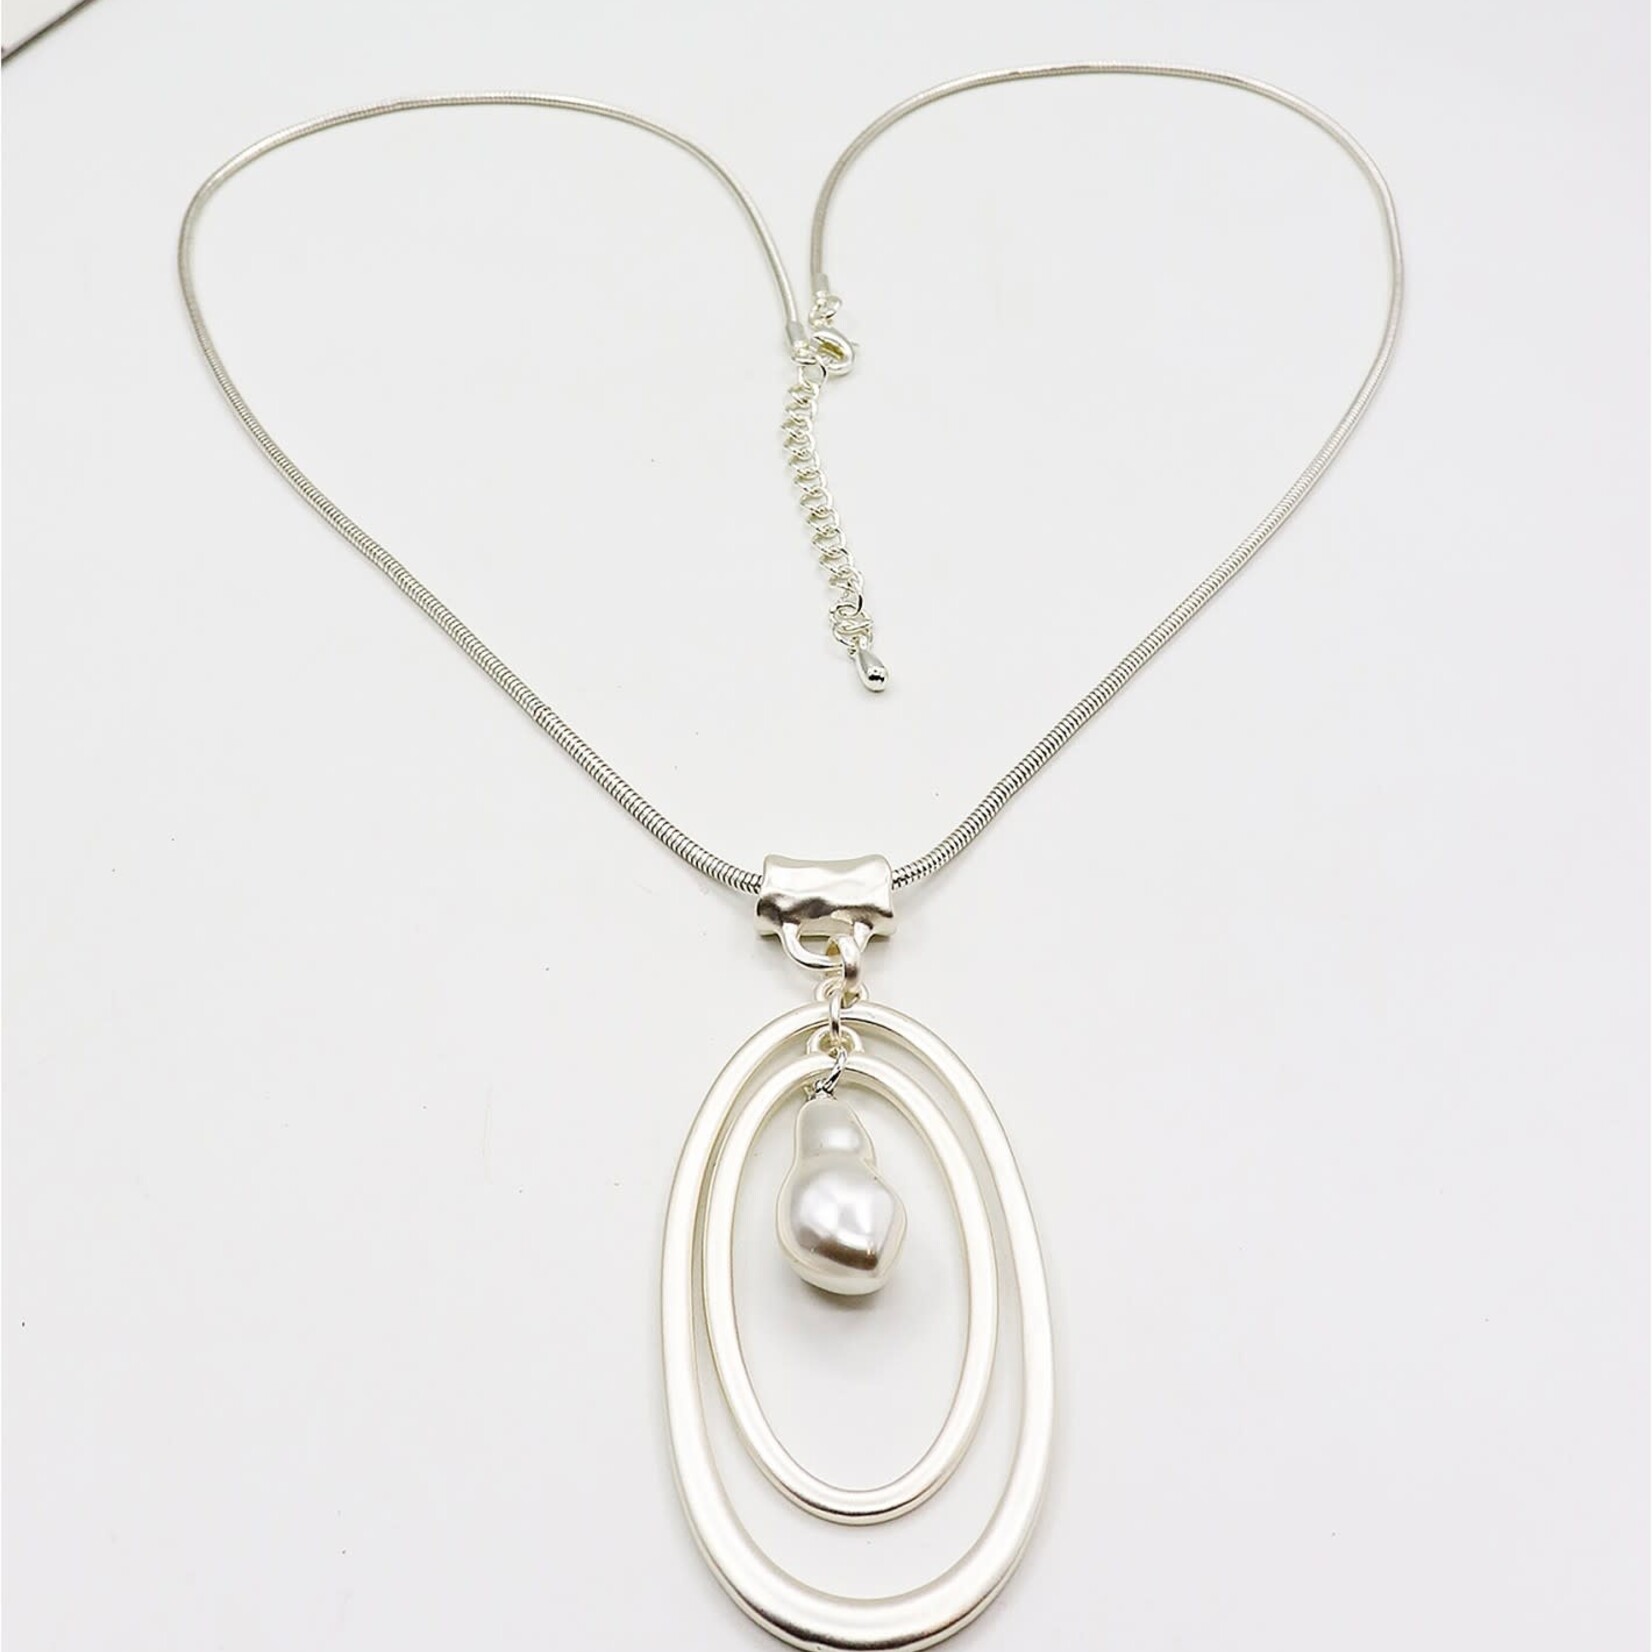 Chain Necklace W/ Water Drop Pendant